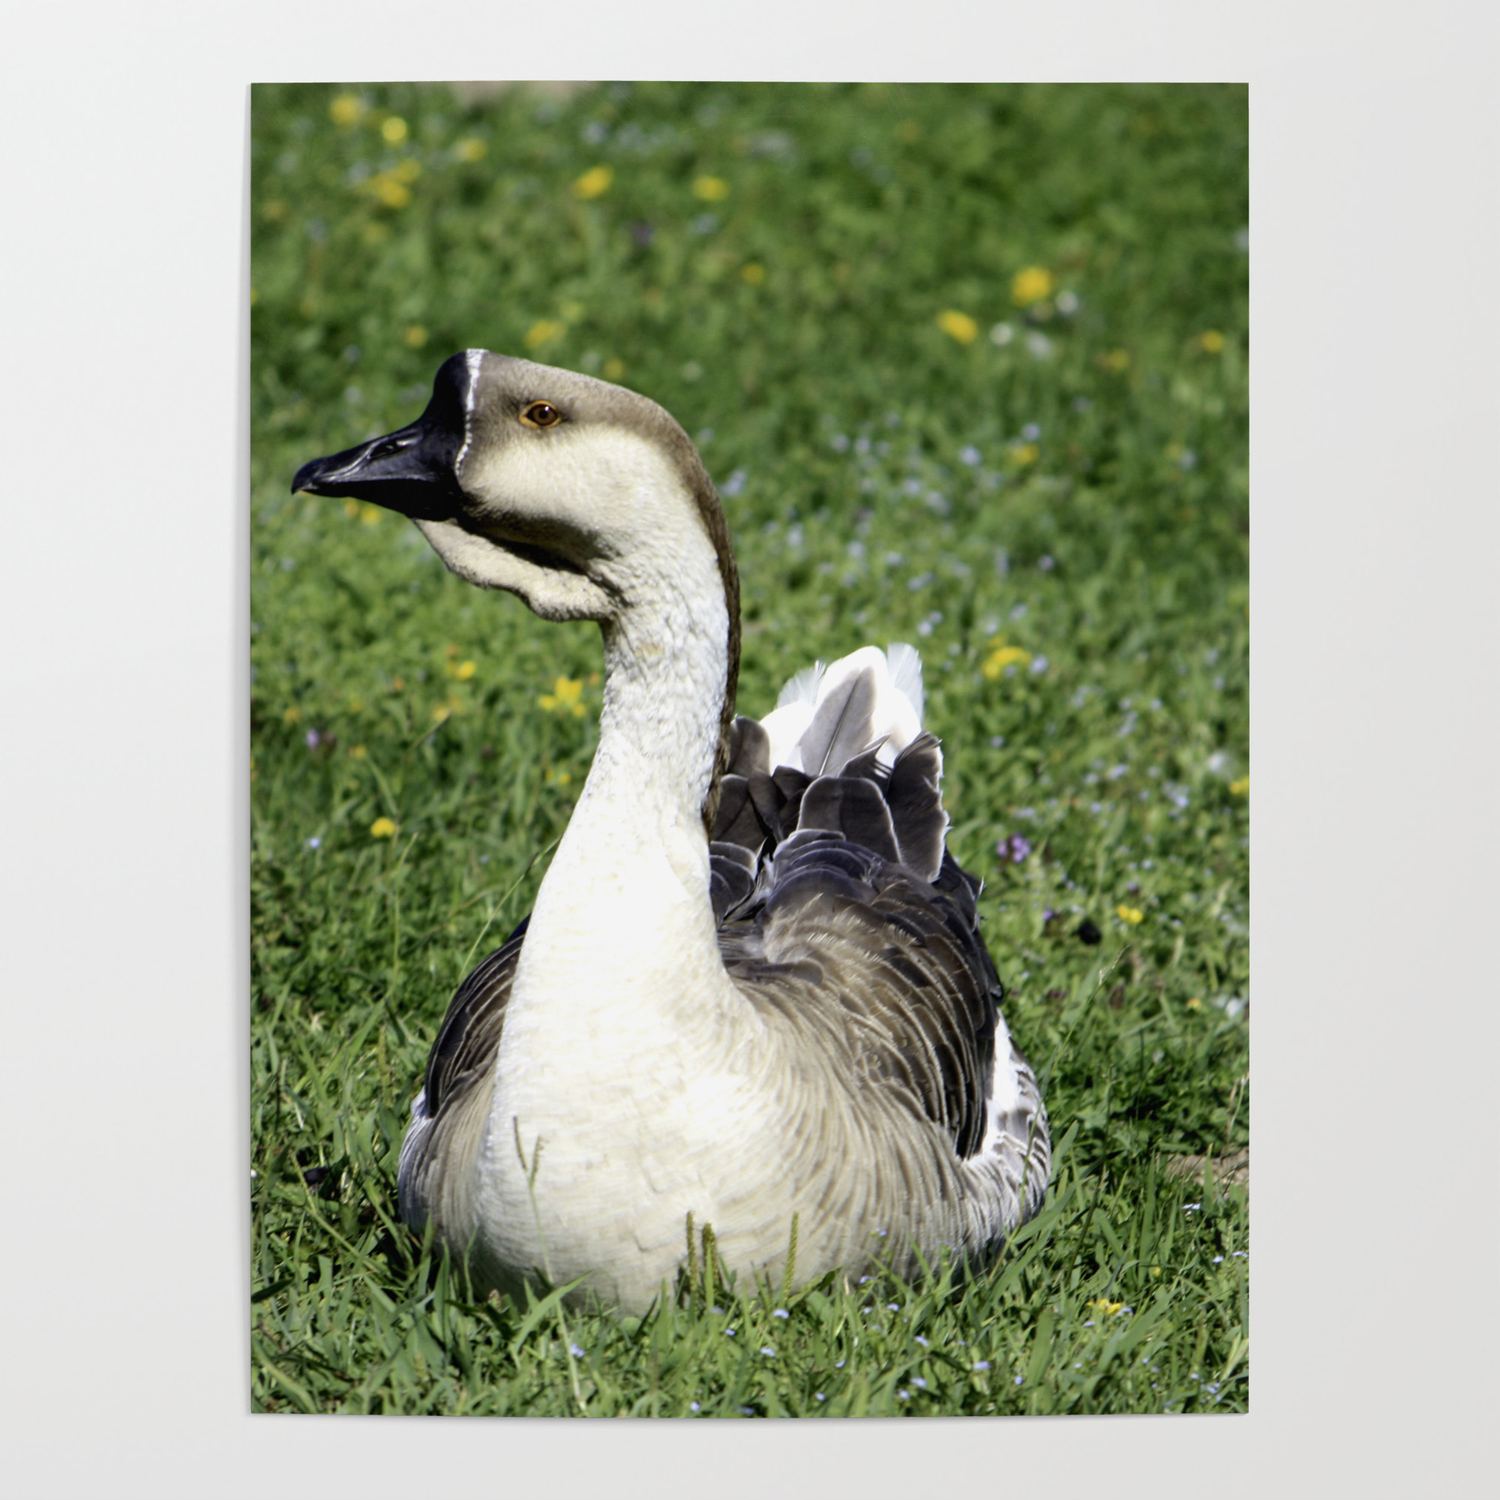 Goose or Gander Poster by Patterns4Nature | Society6